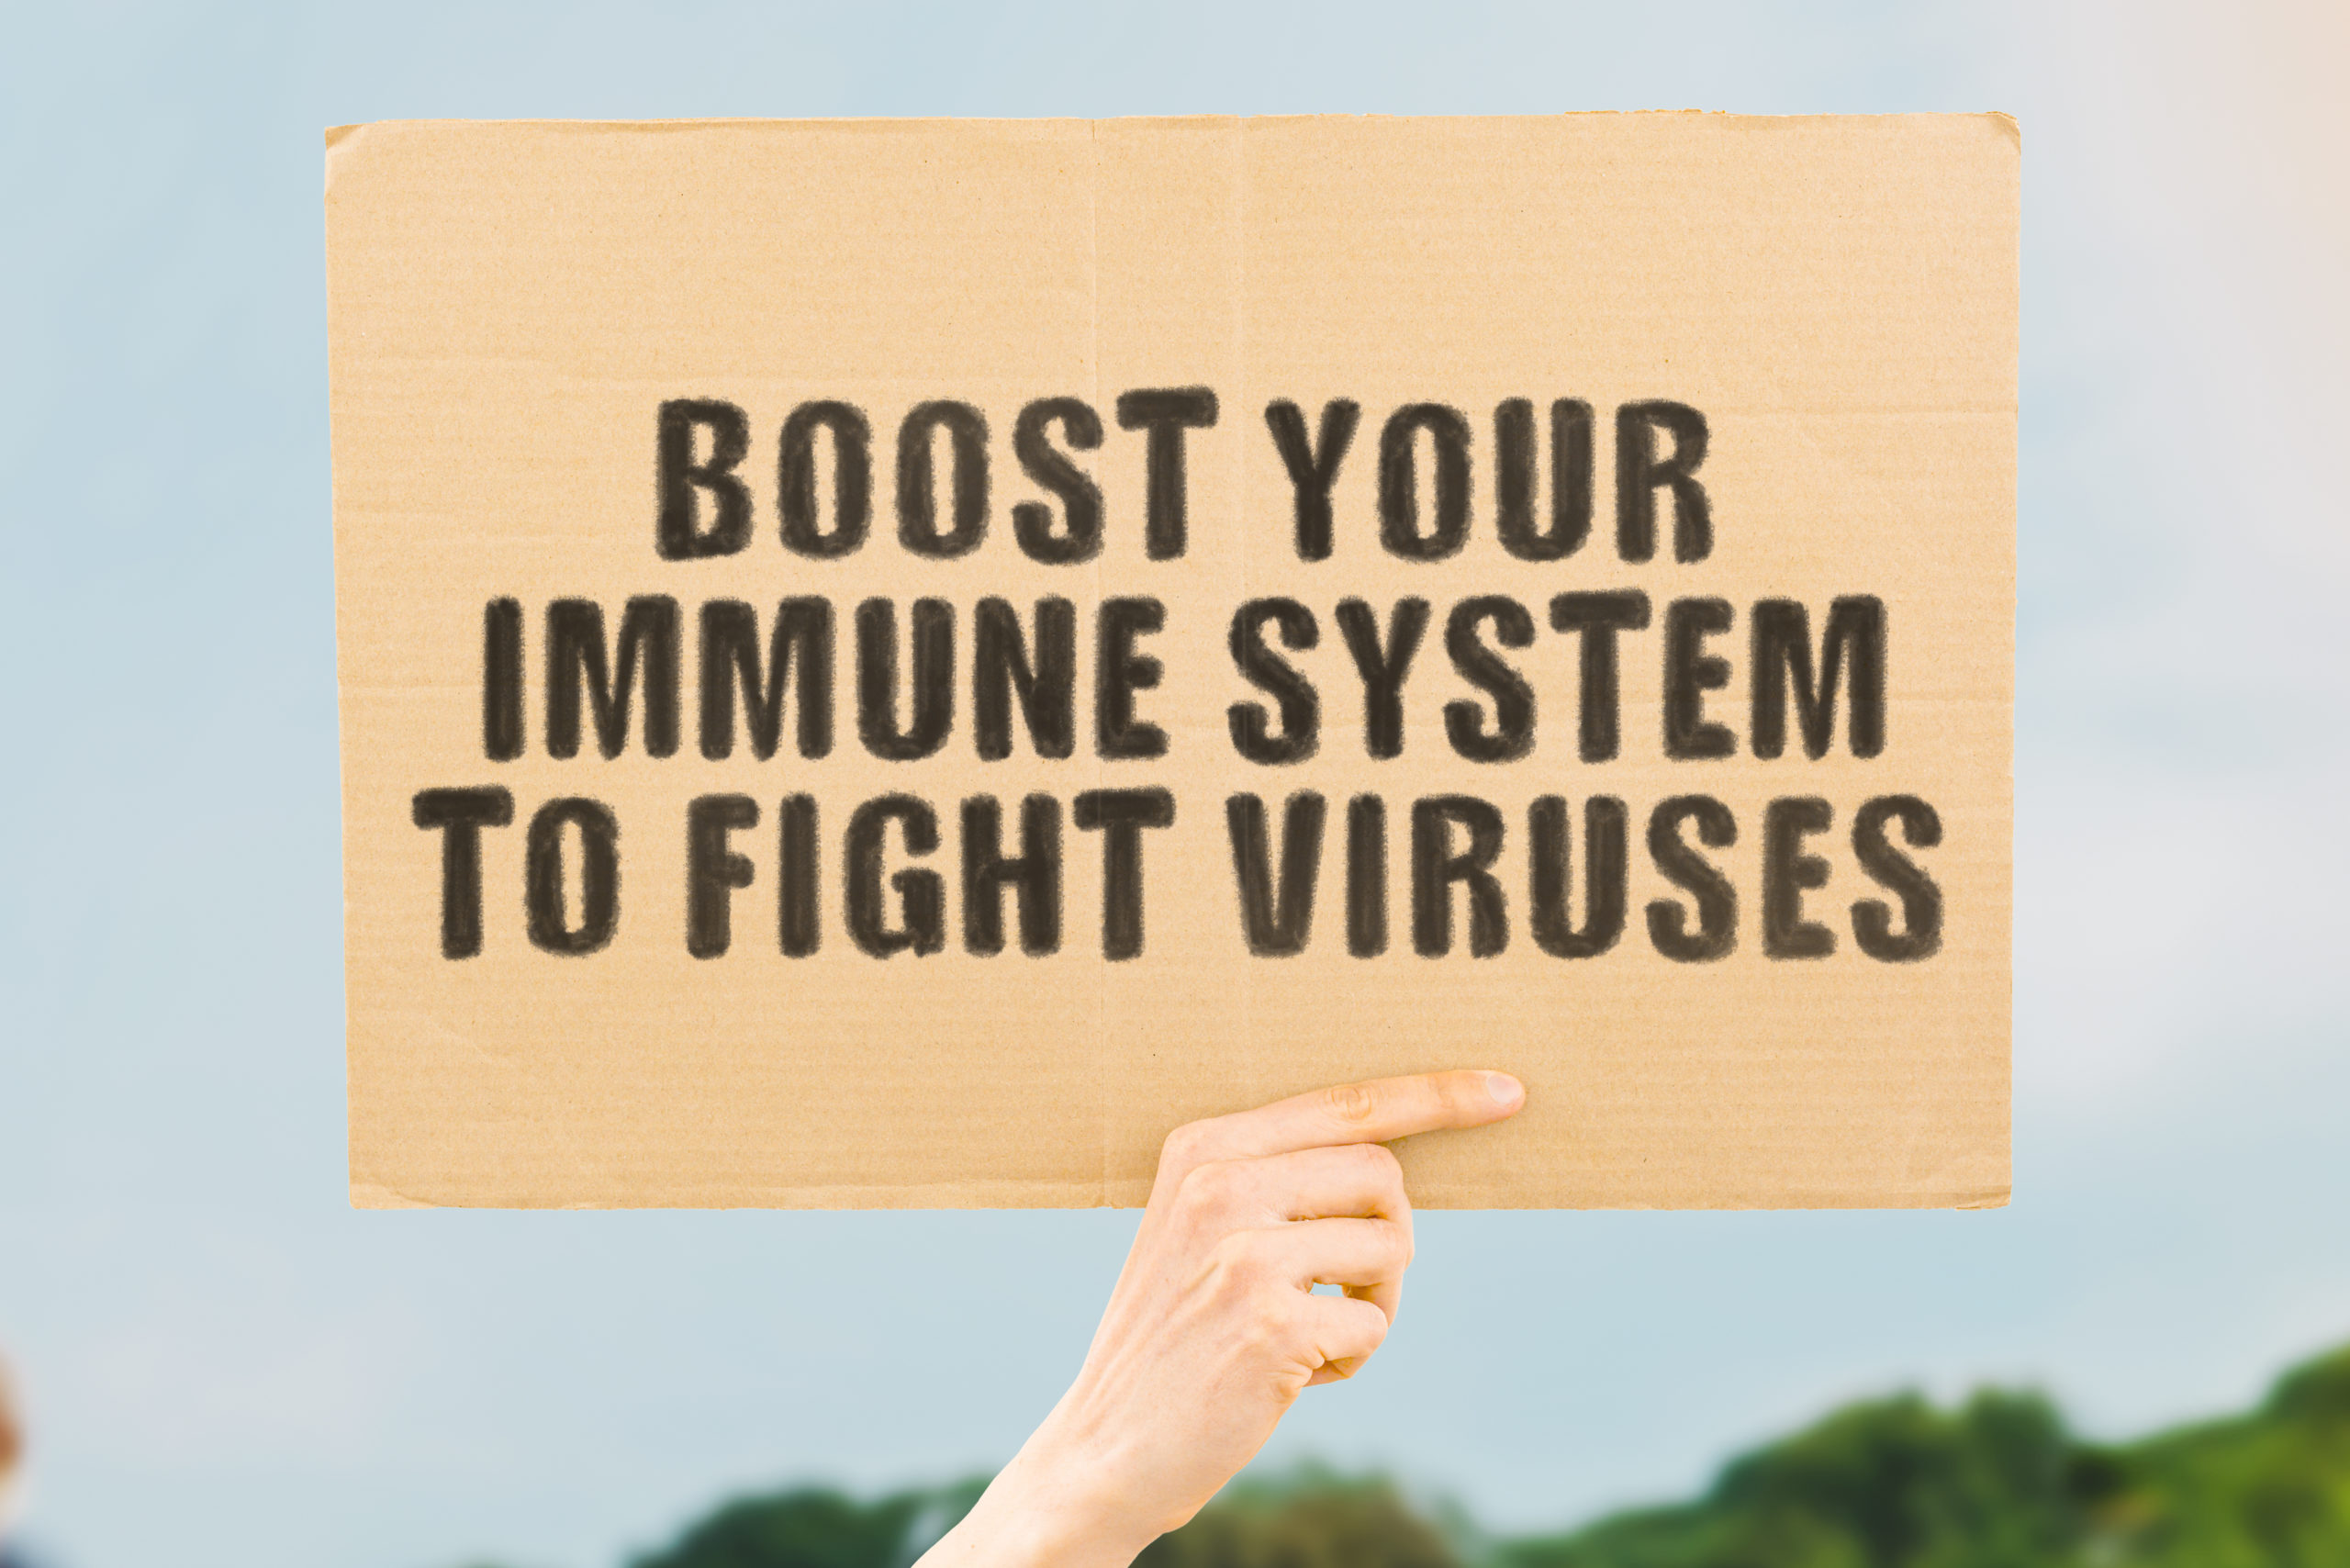 Time to Power up Your Immune System